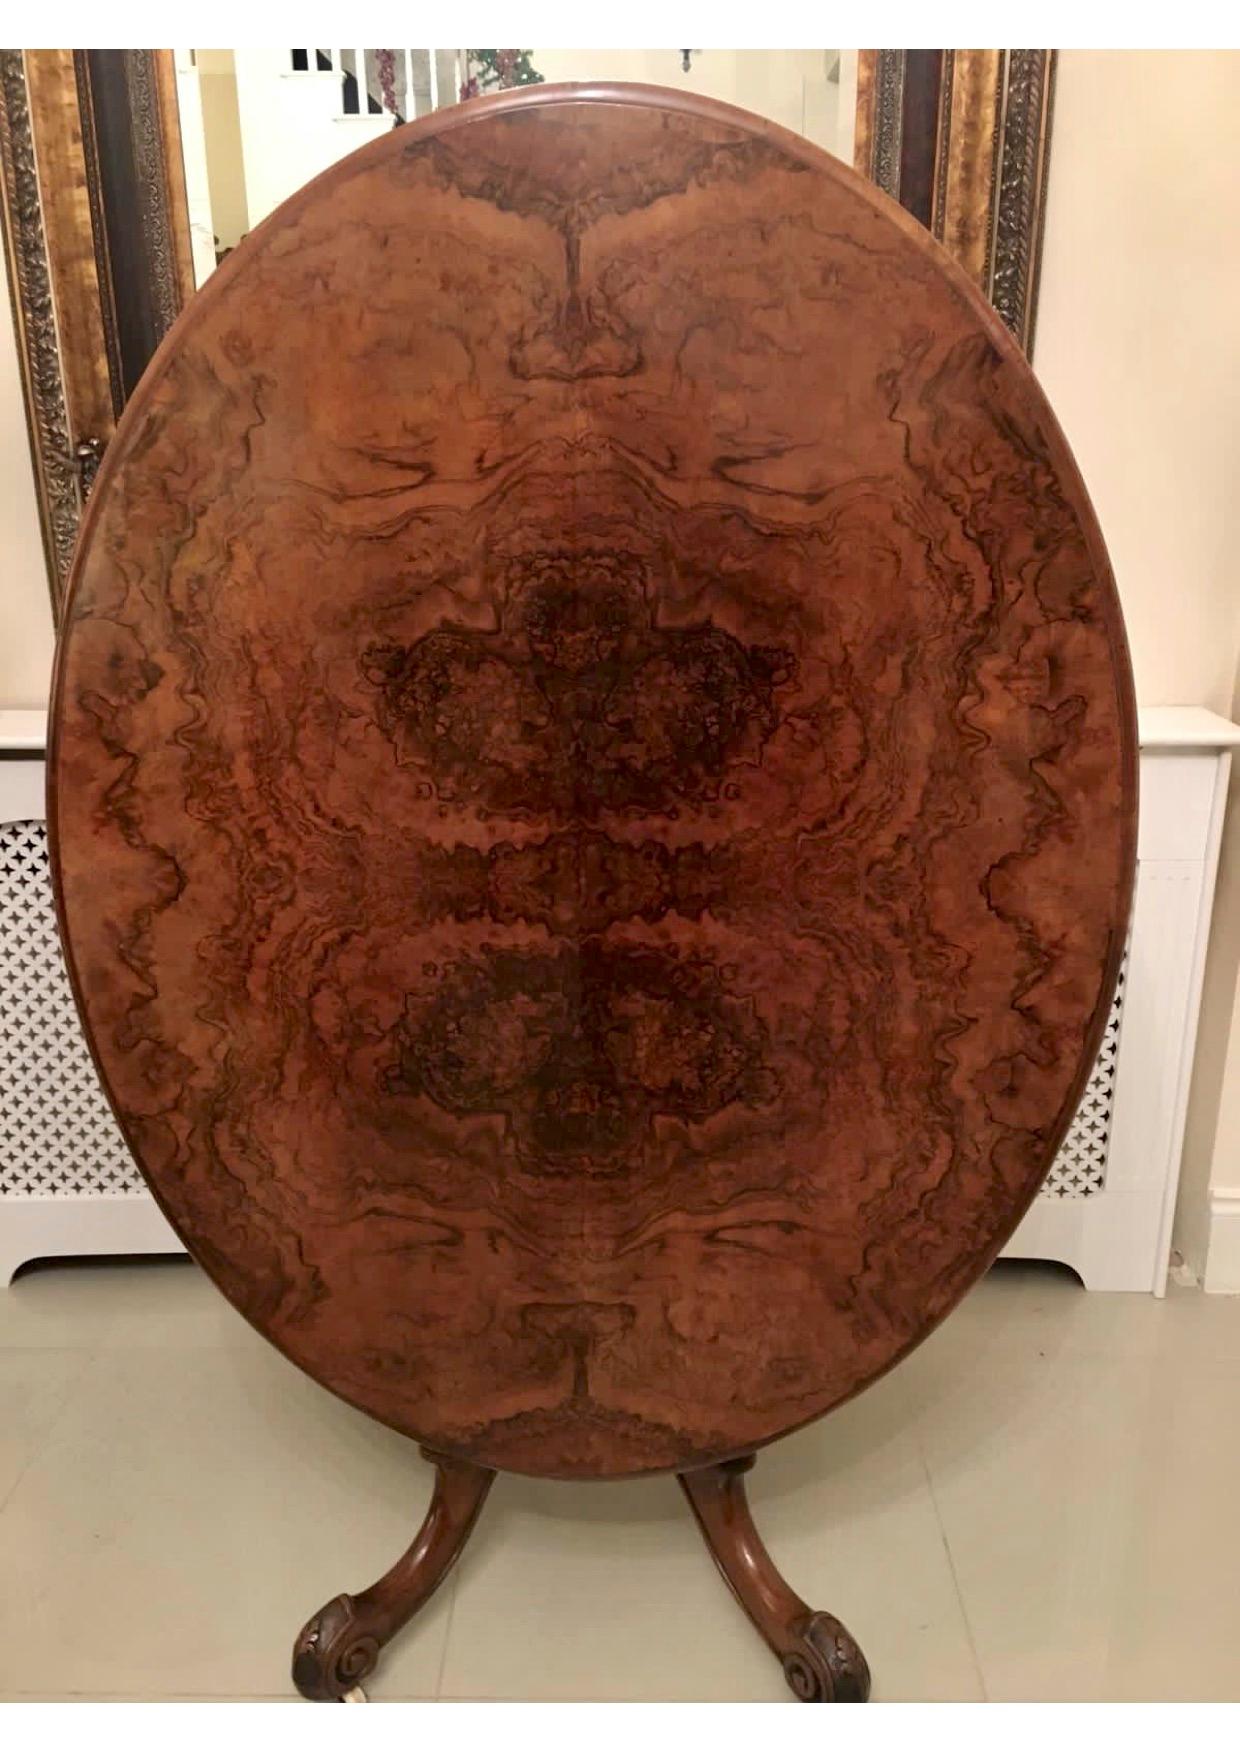 Fine Victorian burr walnut oval centre table having a superior quality oval burr walnut top, a thumb moulded edge and burr walnut oval frieze. It is raised on a beautifully carved solid walnut column and supported by four expertly carved shaped